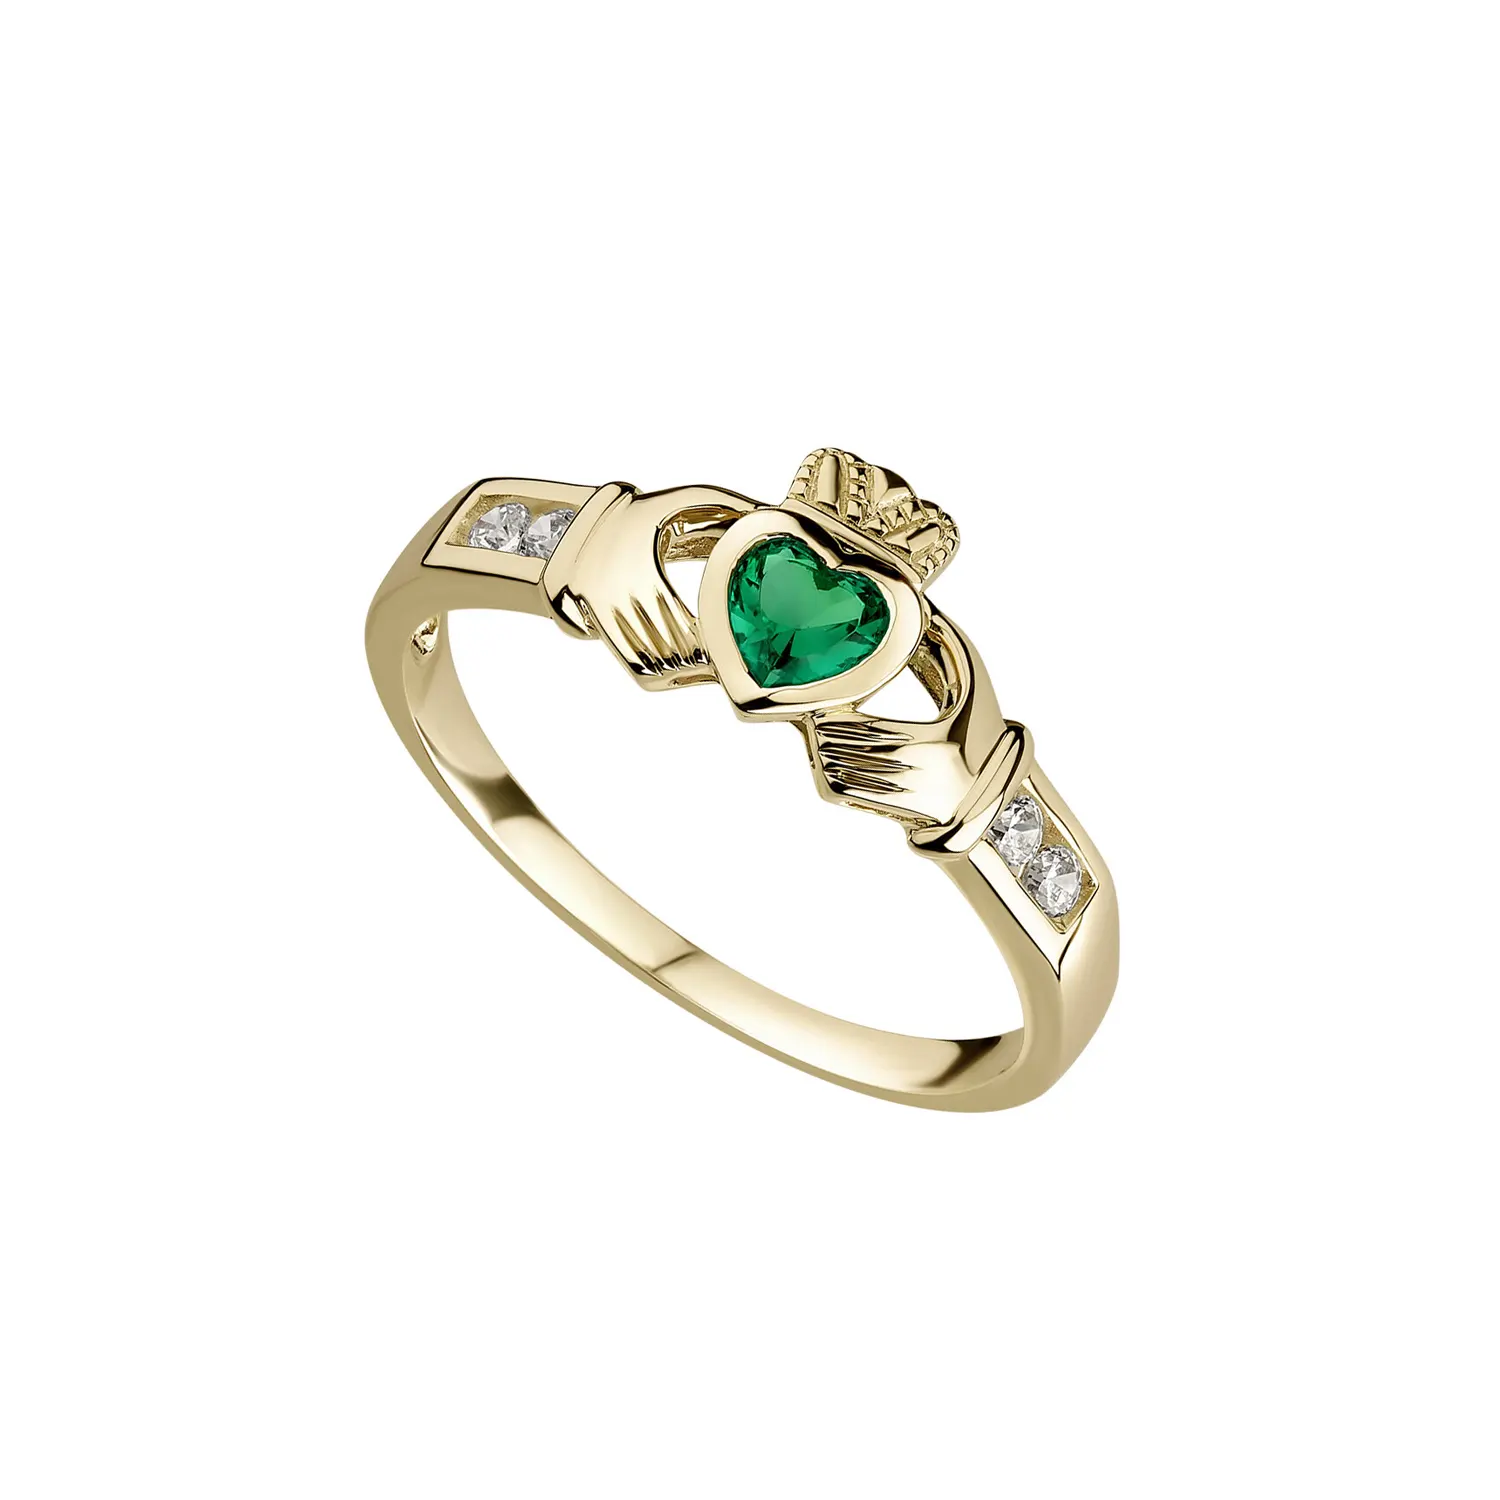 10ct. Yellow Gold & Emerald Claddagh Ring